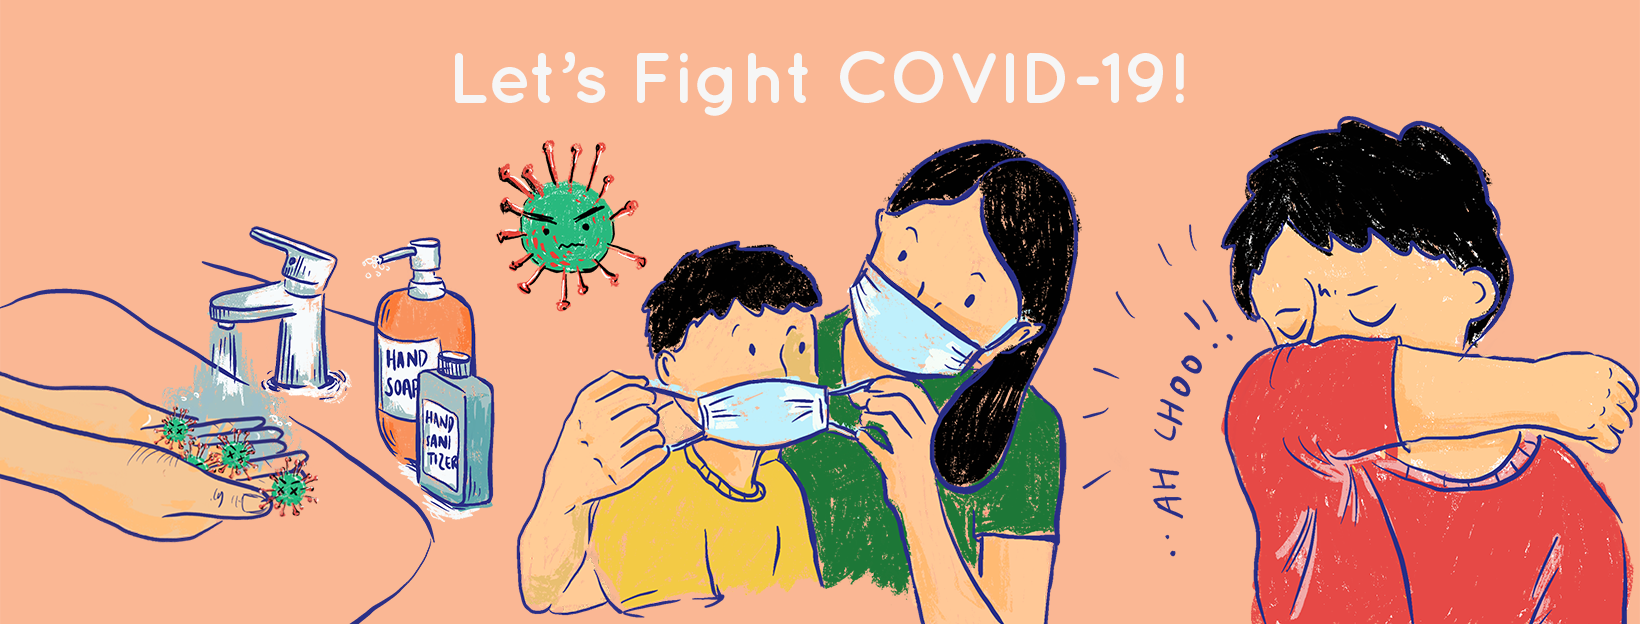 Latest Information on COVID-19 & useful online resources for caregivers